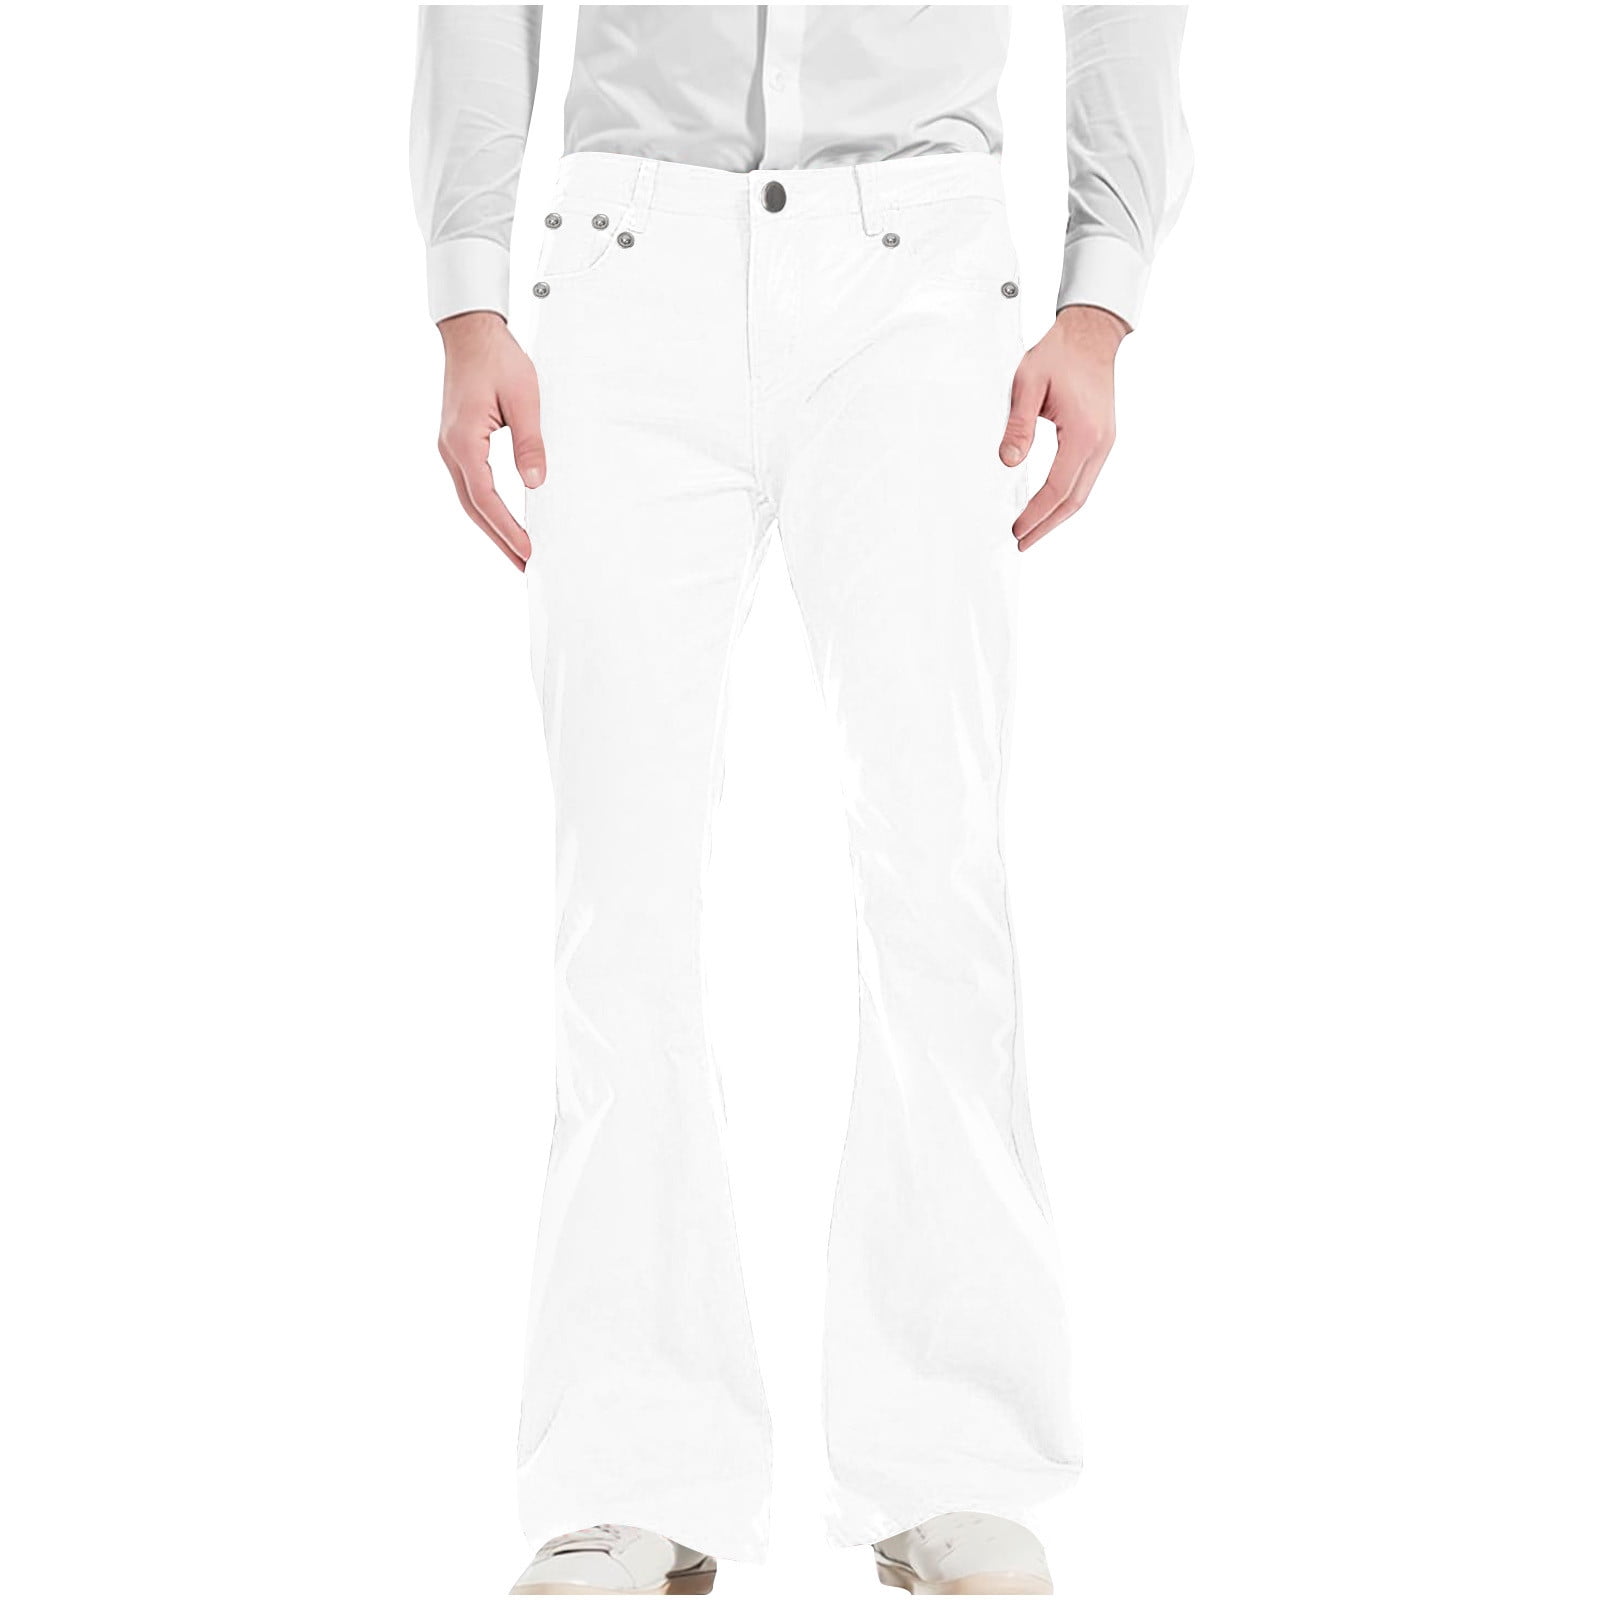 Wyongtao Vintage Pants for Men Bell Bottom Pants 70s Disco Outfits Slim Fit Retro Flared Trousers White S c1da8d95 1112 44e2 8450 8957dd7240f2.518e34221bd3447c3e4b06ff634e17ff